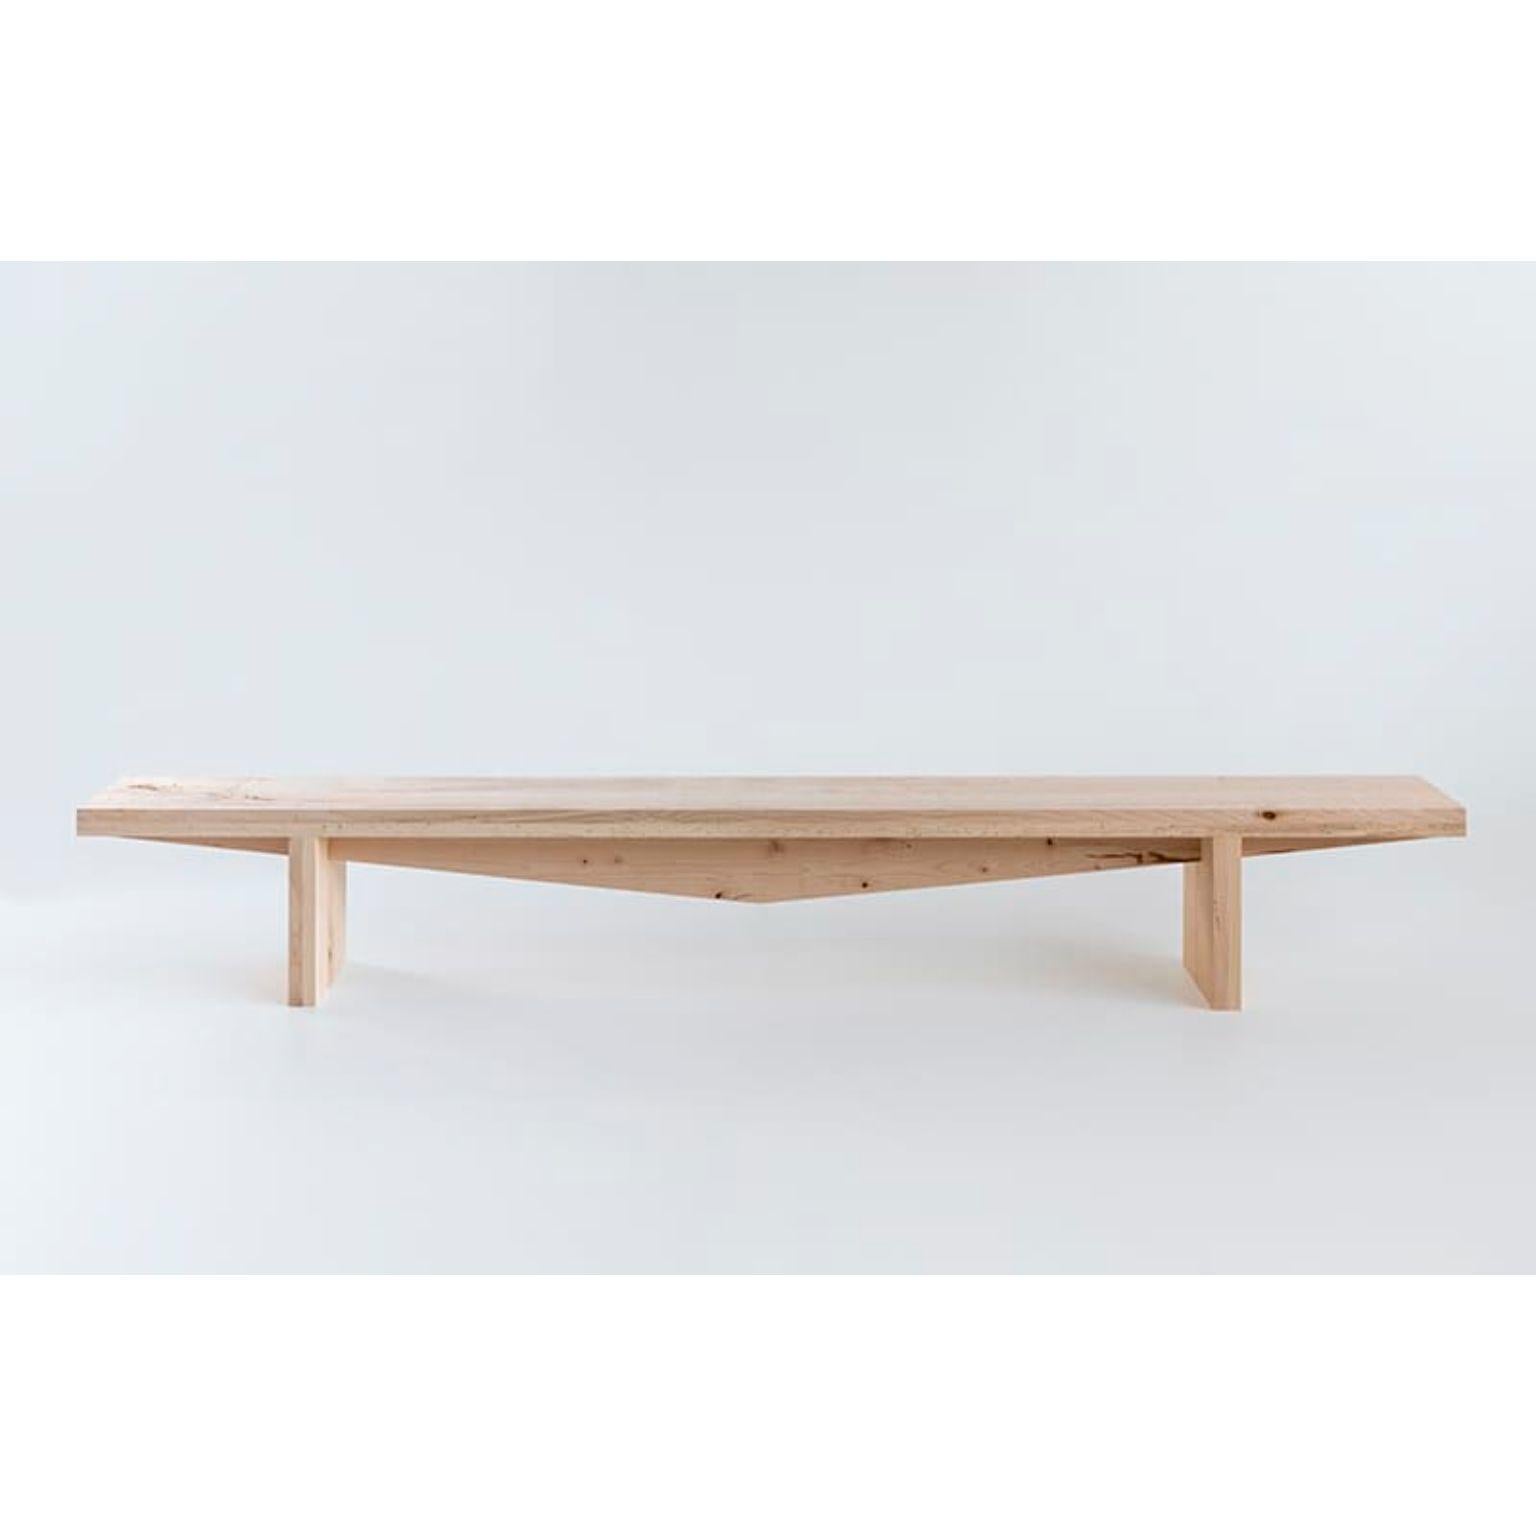 Alalunga Bench by Secondome Edizioni and Studio F
Designer: Giulio Iacchetti.
Dimensions: D 30 x W 300 x H 43 cm.
Materials: Solid woodworm maple wood.

Collection / Production: Secondome + Studio F. This piece can be customized. Available finishes: